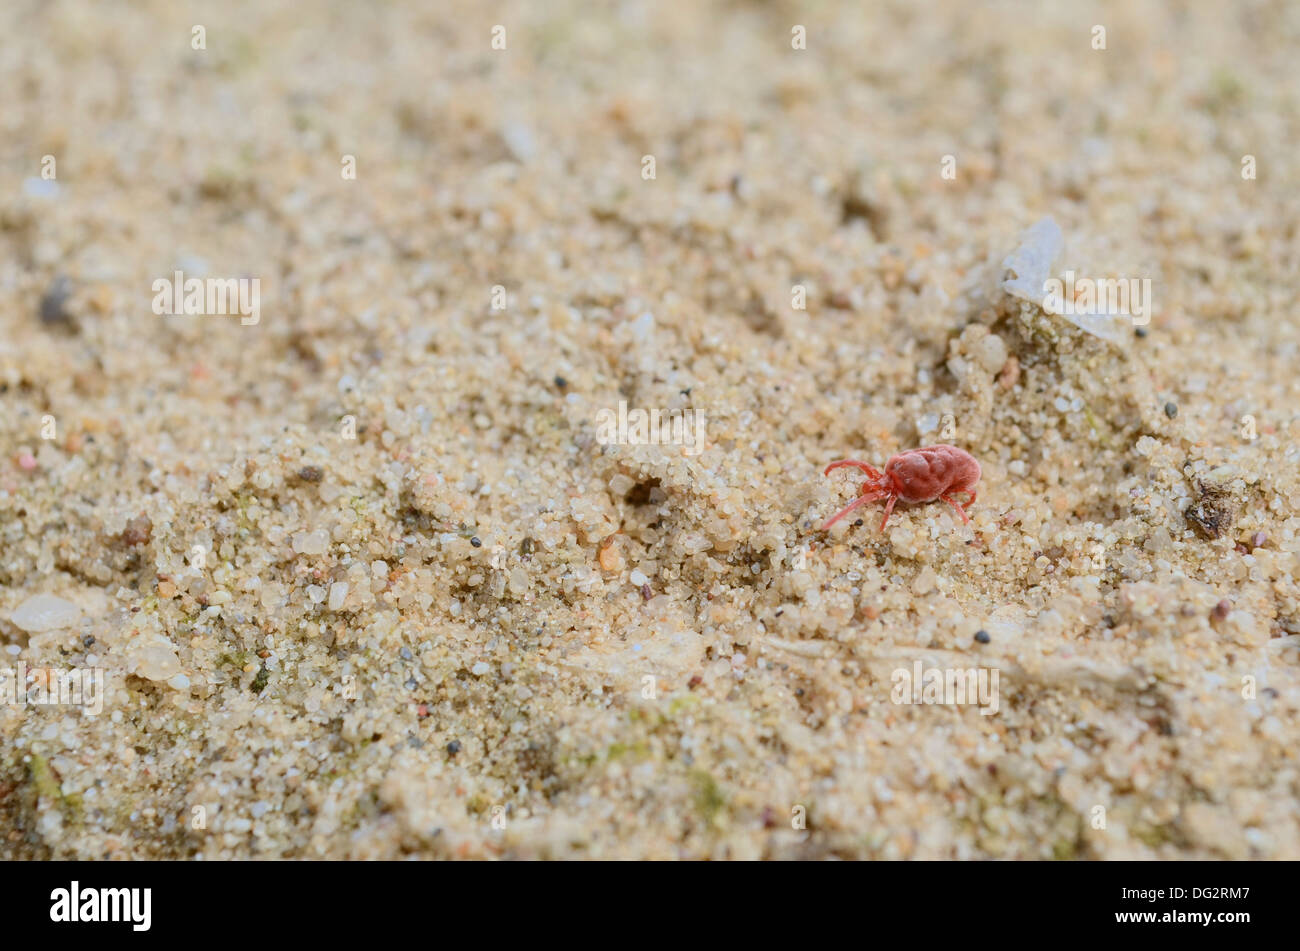 A Single Velvet Mite Crawling in the Pure Sand Stock Photo